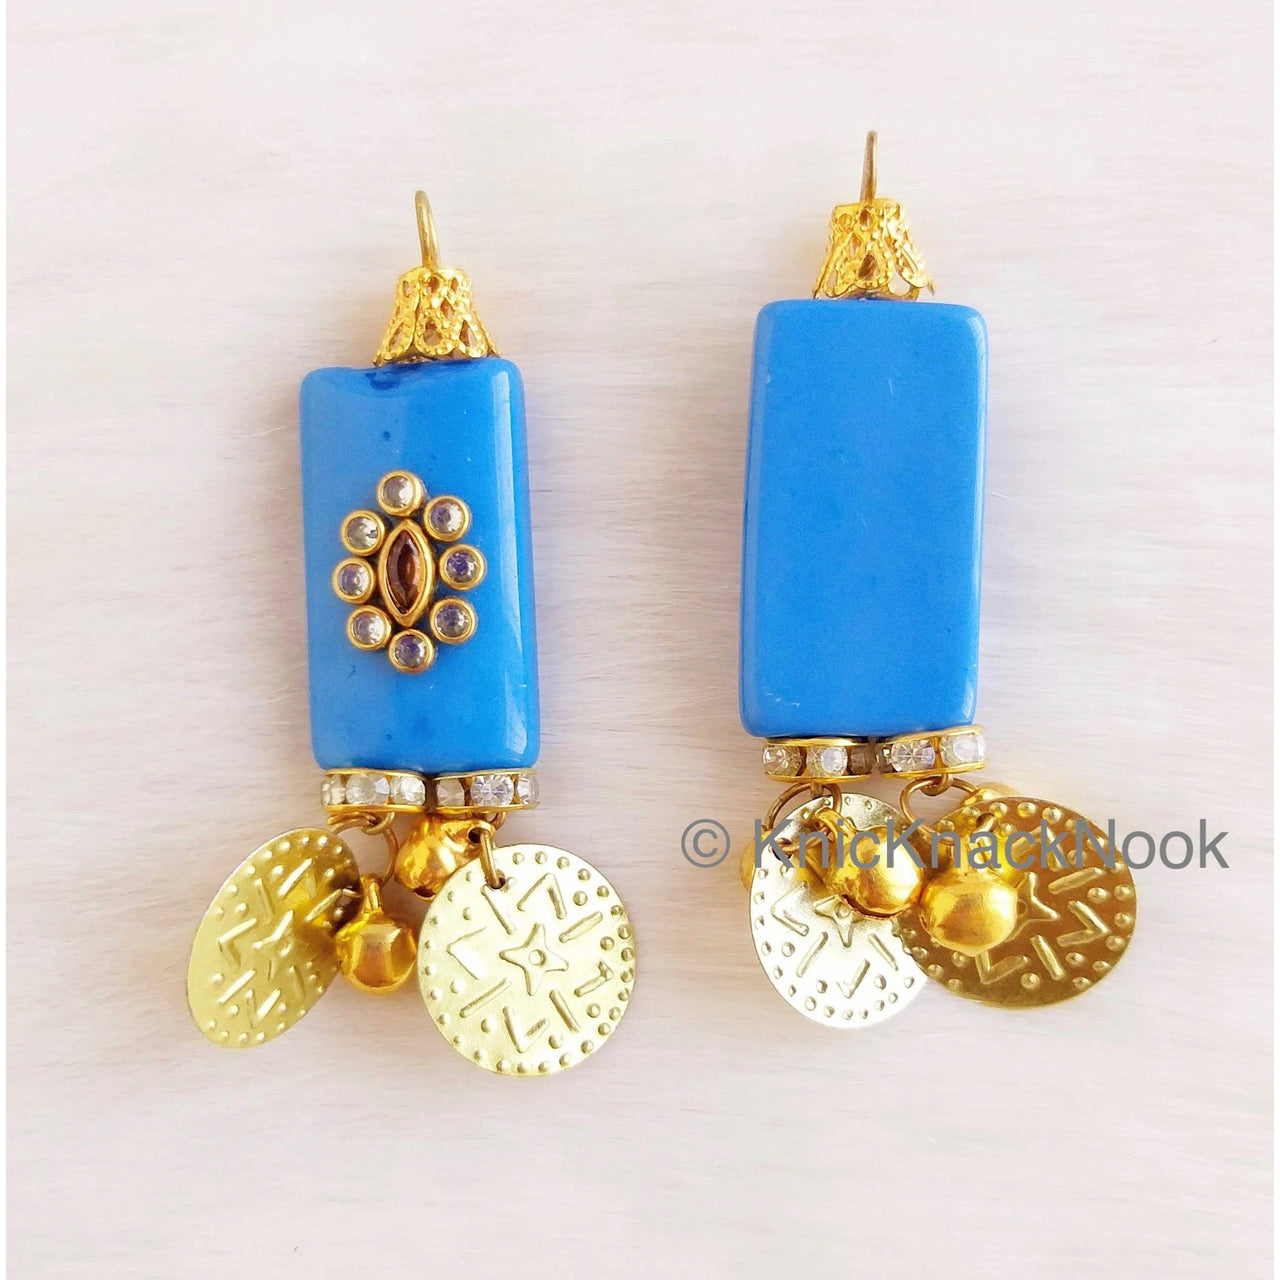 Blue And Gold Beaded Tassels  With Gold Coins Latkan, Kundan Beads, Belly Dancing